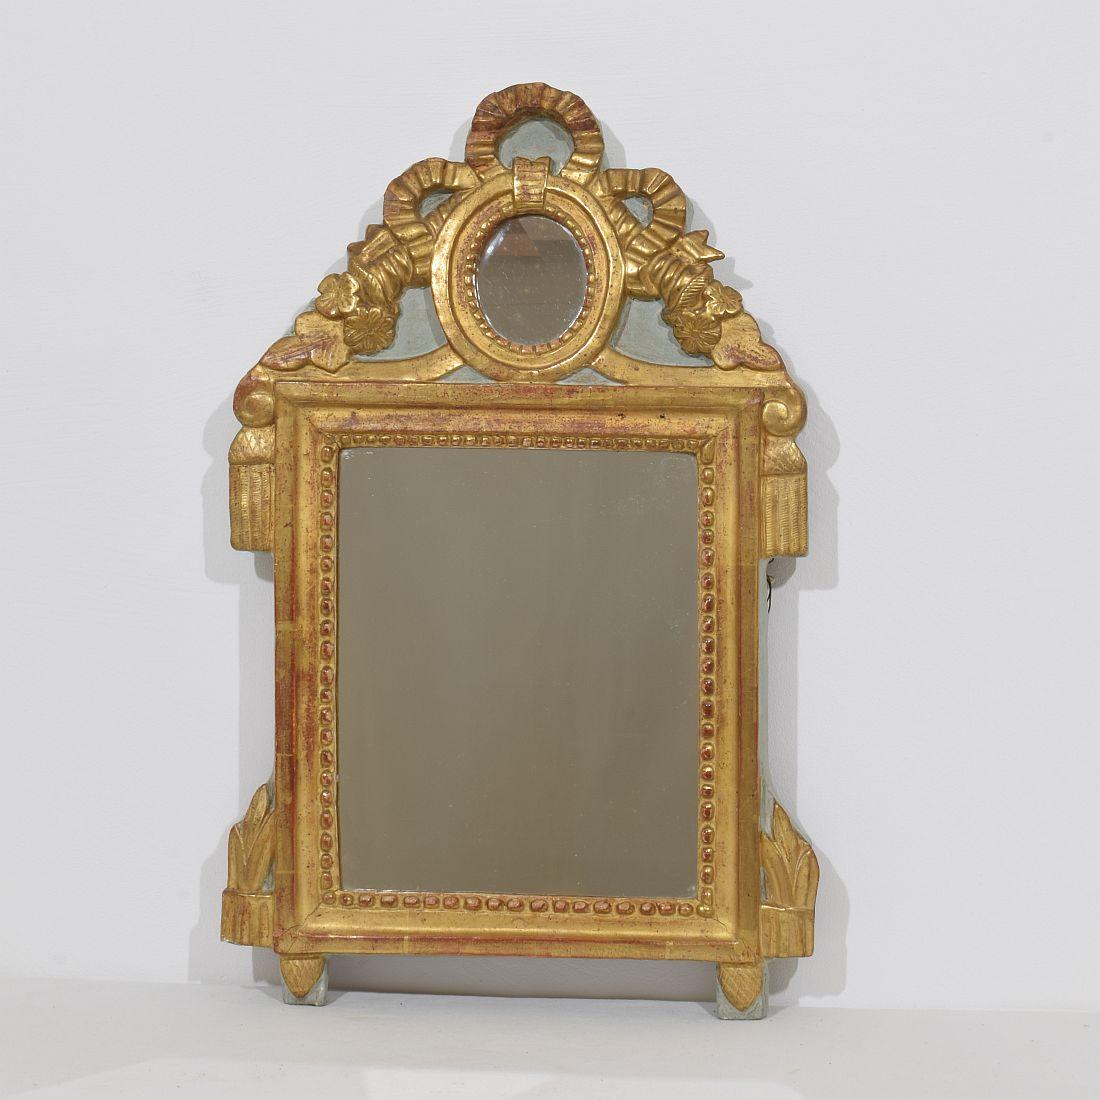 Small giltwood Louis XVI style mirror. Beautiful period piece.
France, circa 1760-1790.
Weathered, small ,losses and old repairs.